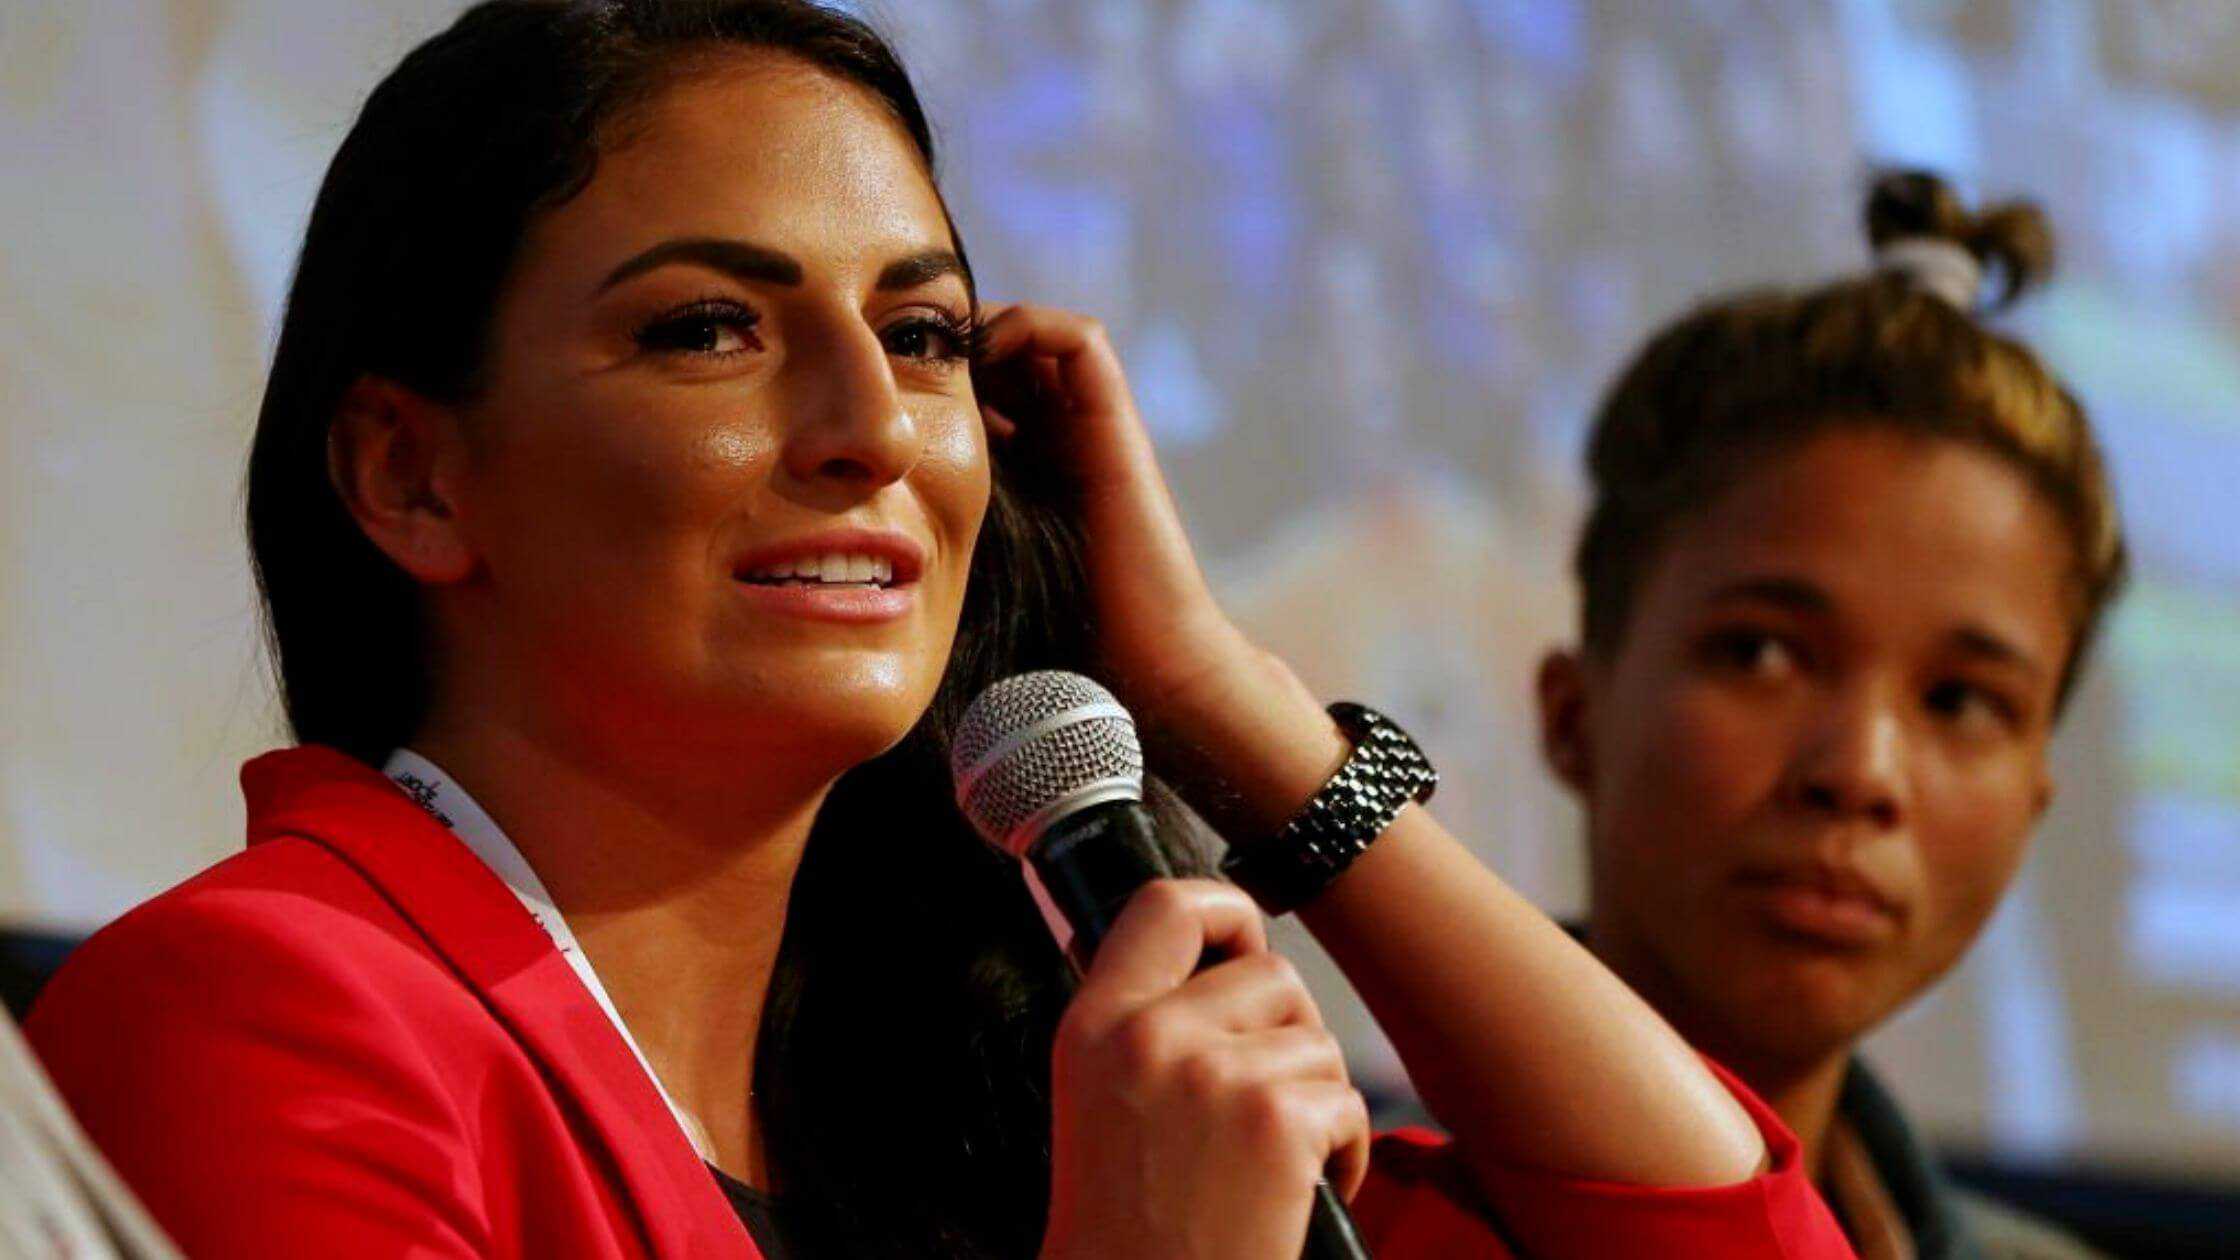 Sonya Deville About Coming Out As Gay On National TV